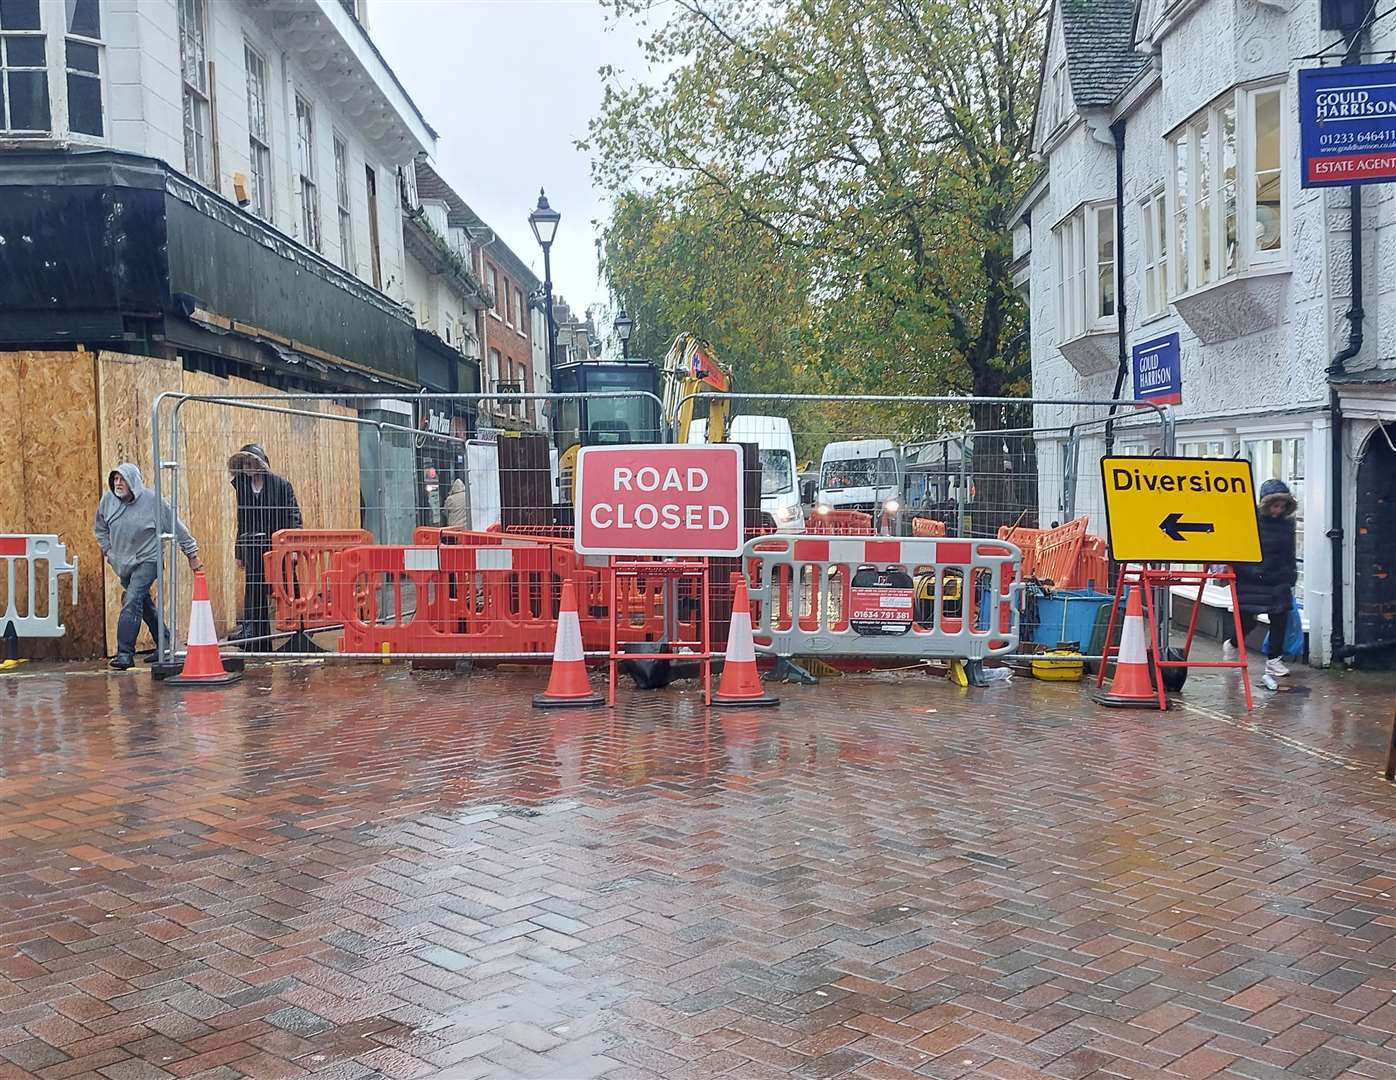 Ashford’s Lower High Street is closed at the junction with North Street